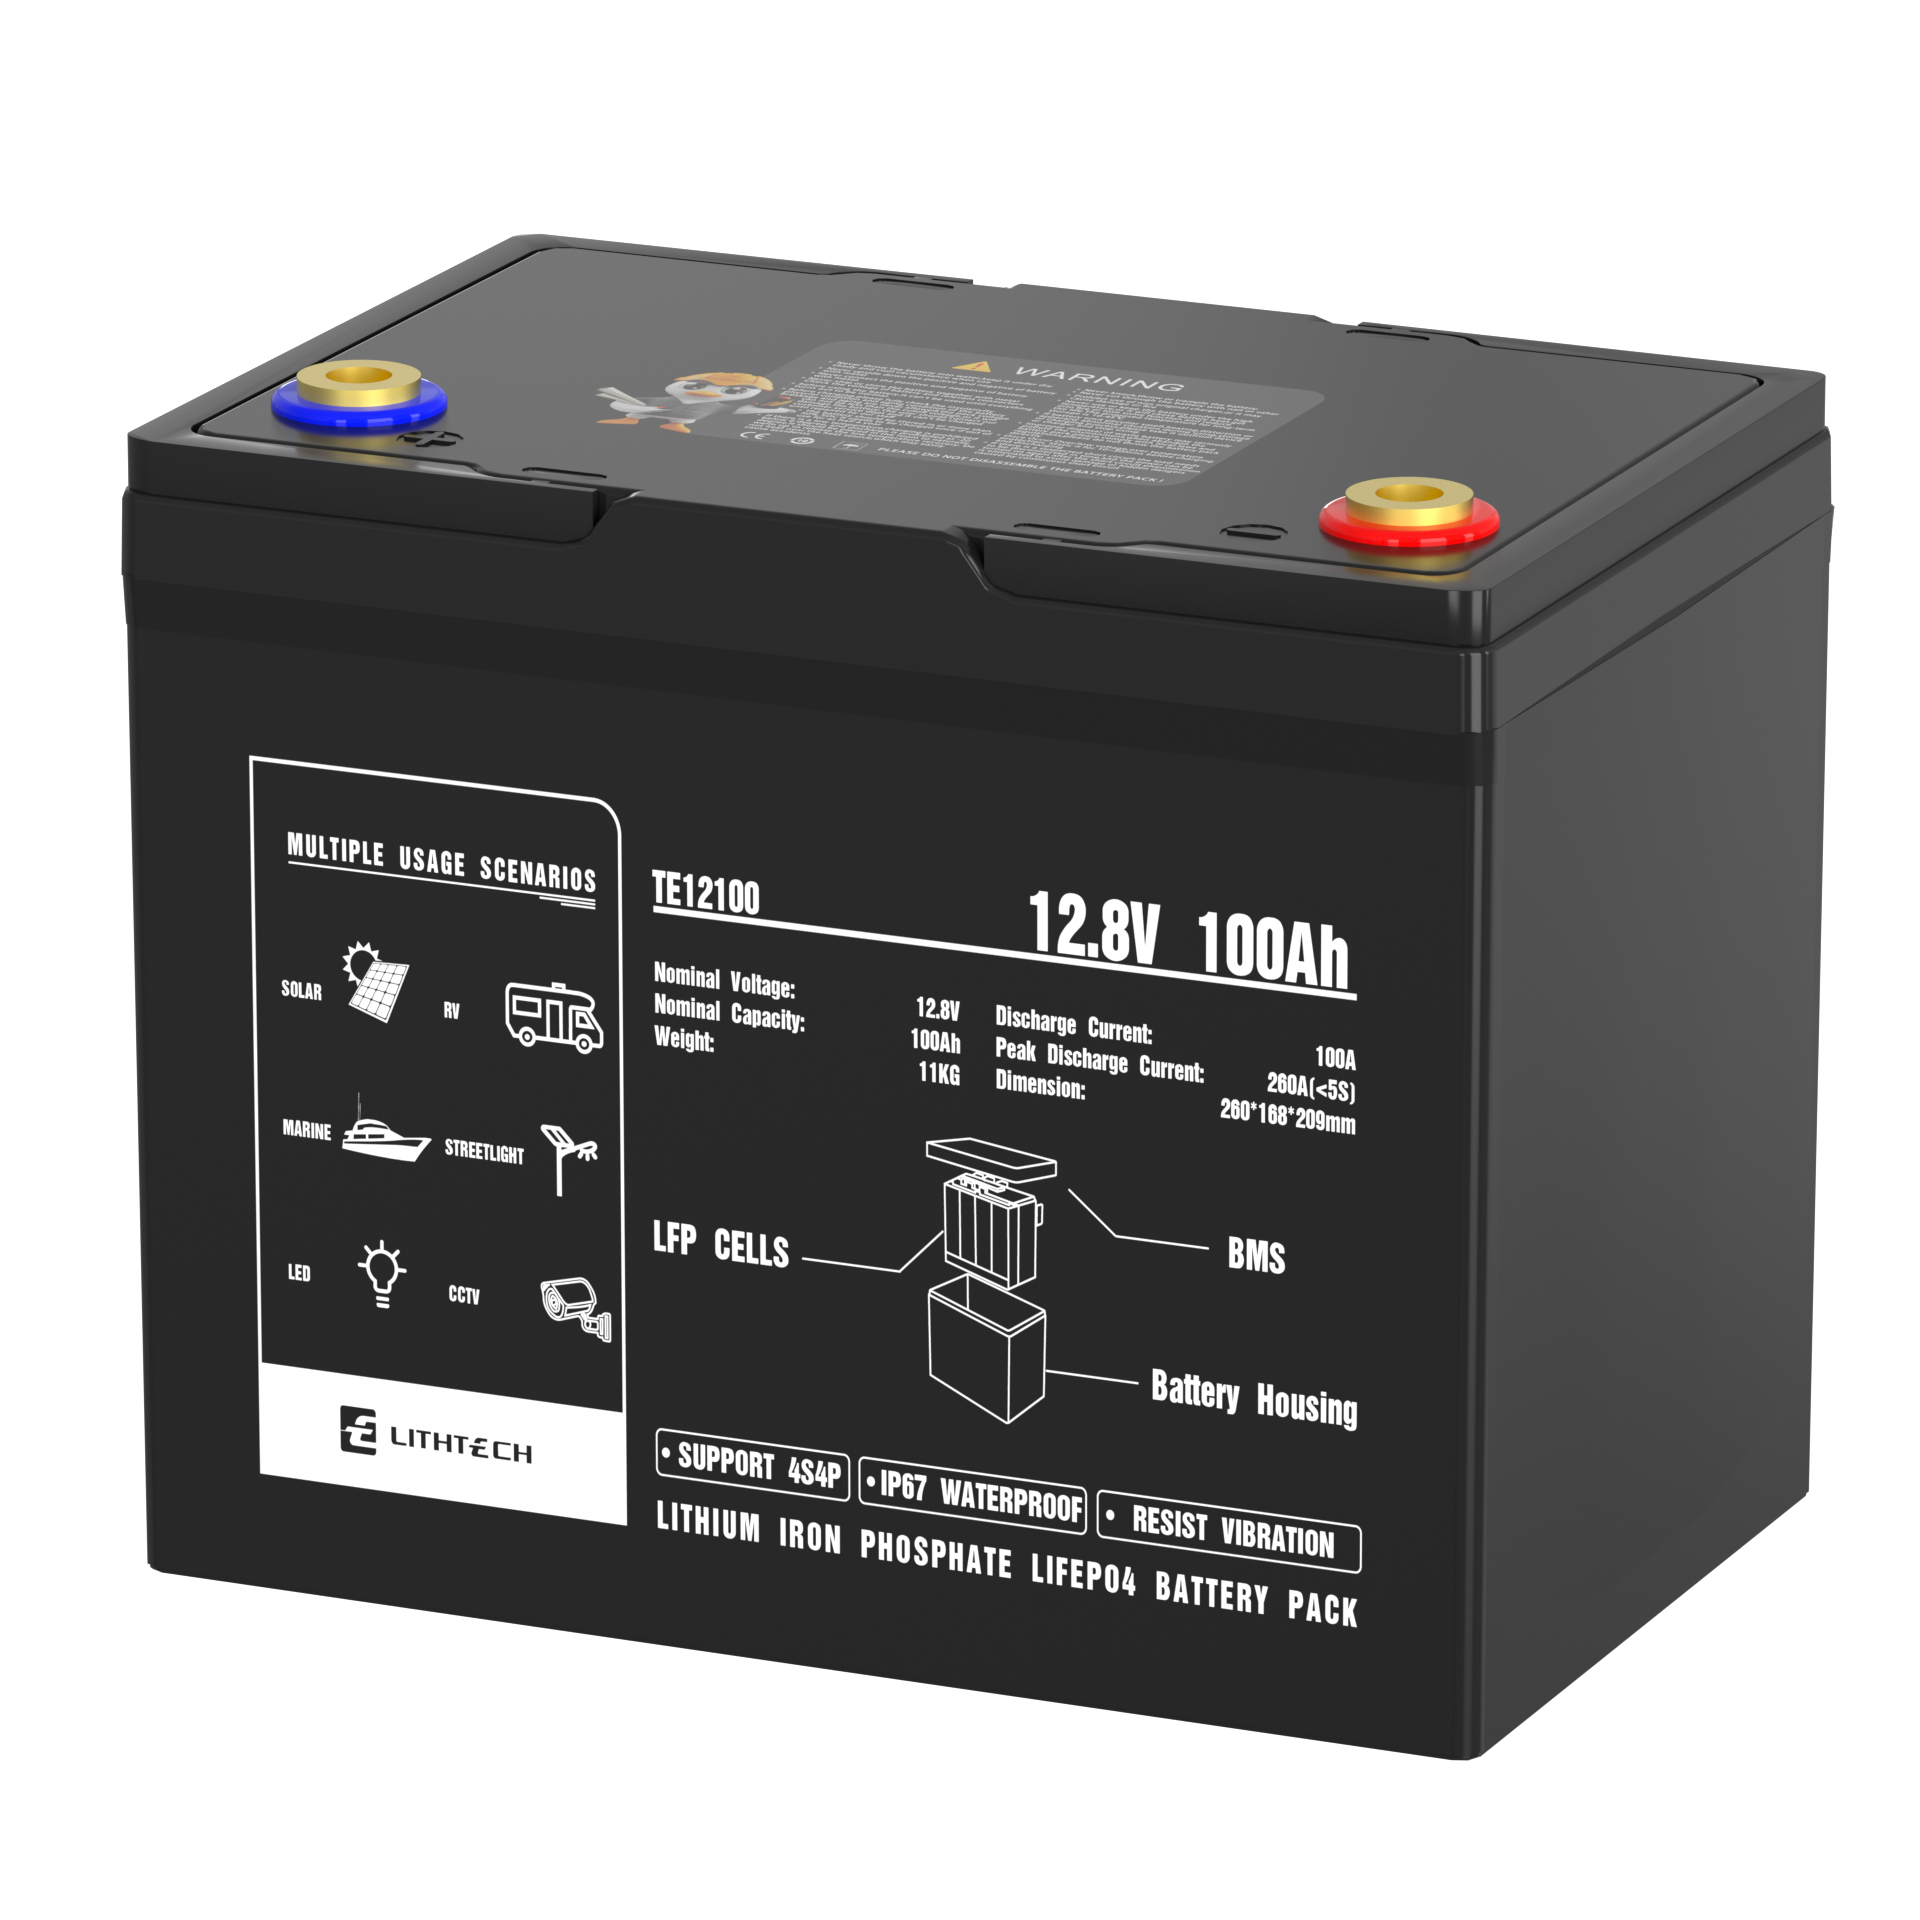 Lithtech TE12100 Solar Lifepo4 12v 100ah Lithium Iron Phosphate Battery Pack